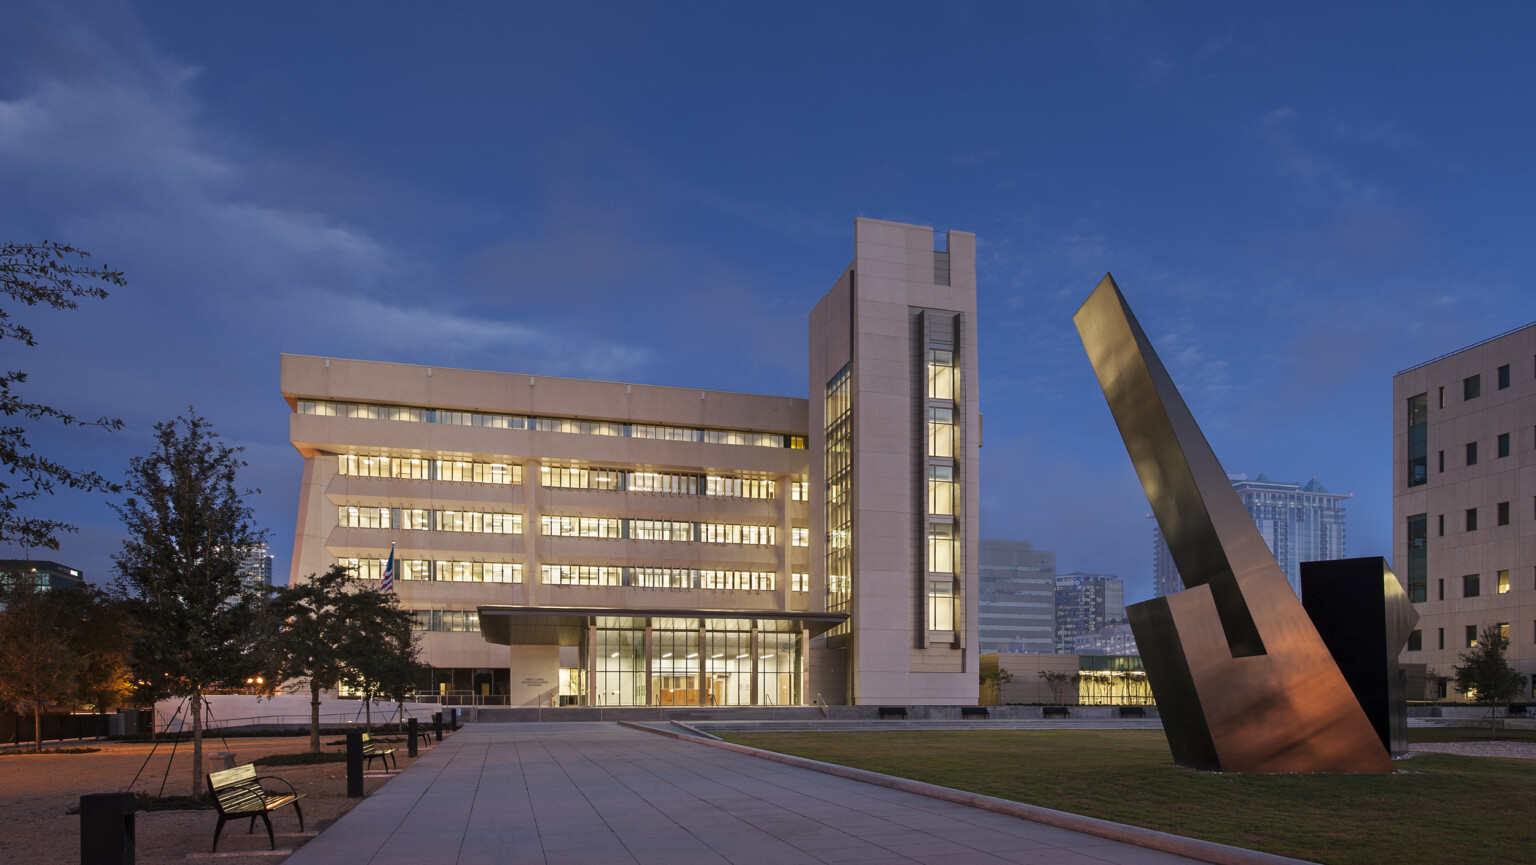 illuminated federal building at night with large sculpture on the lawn